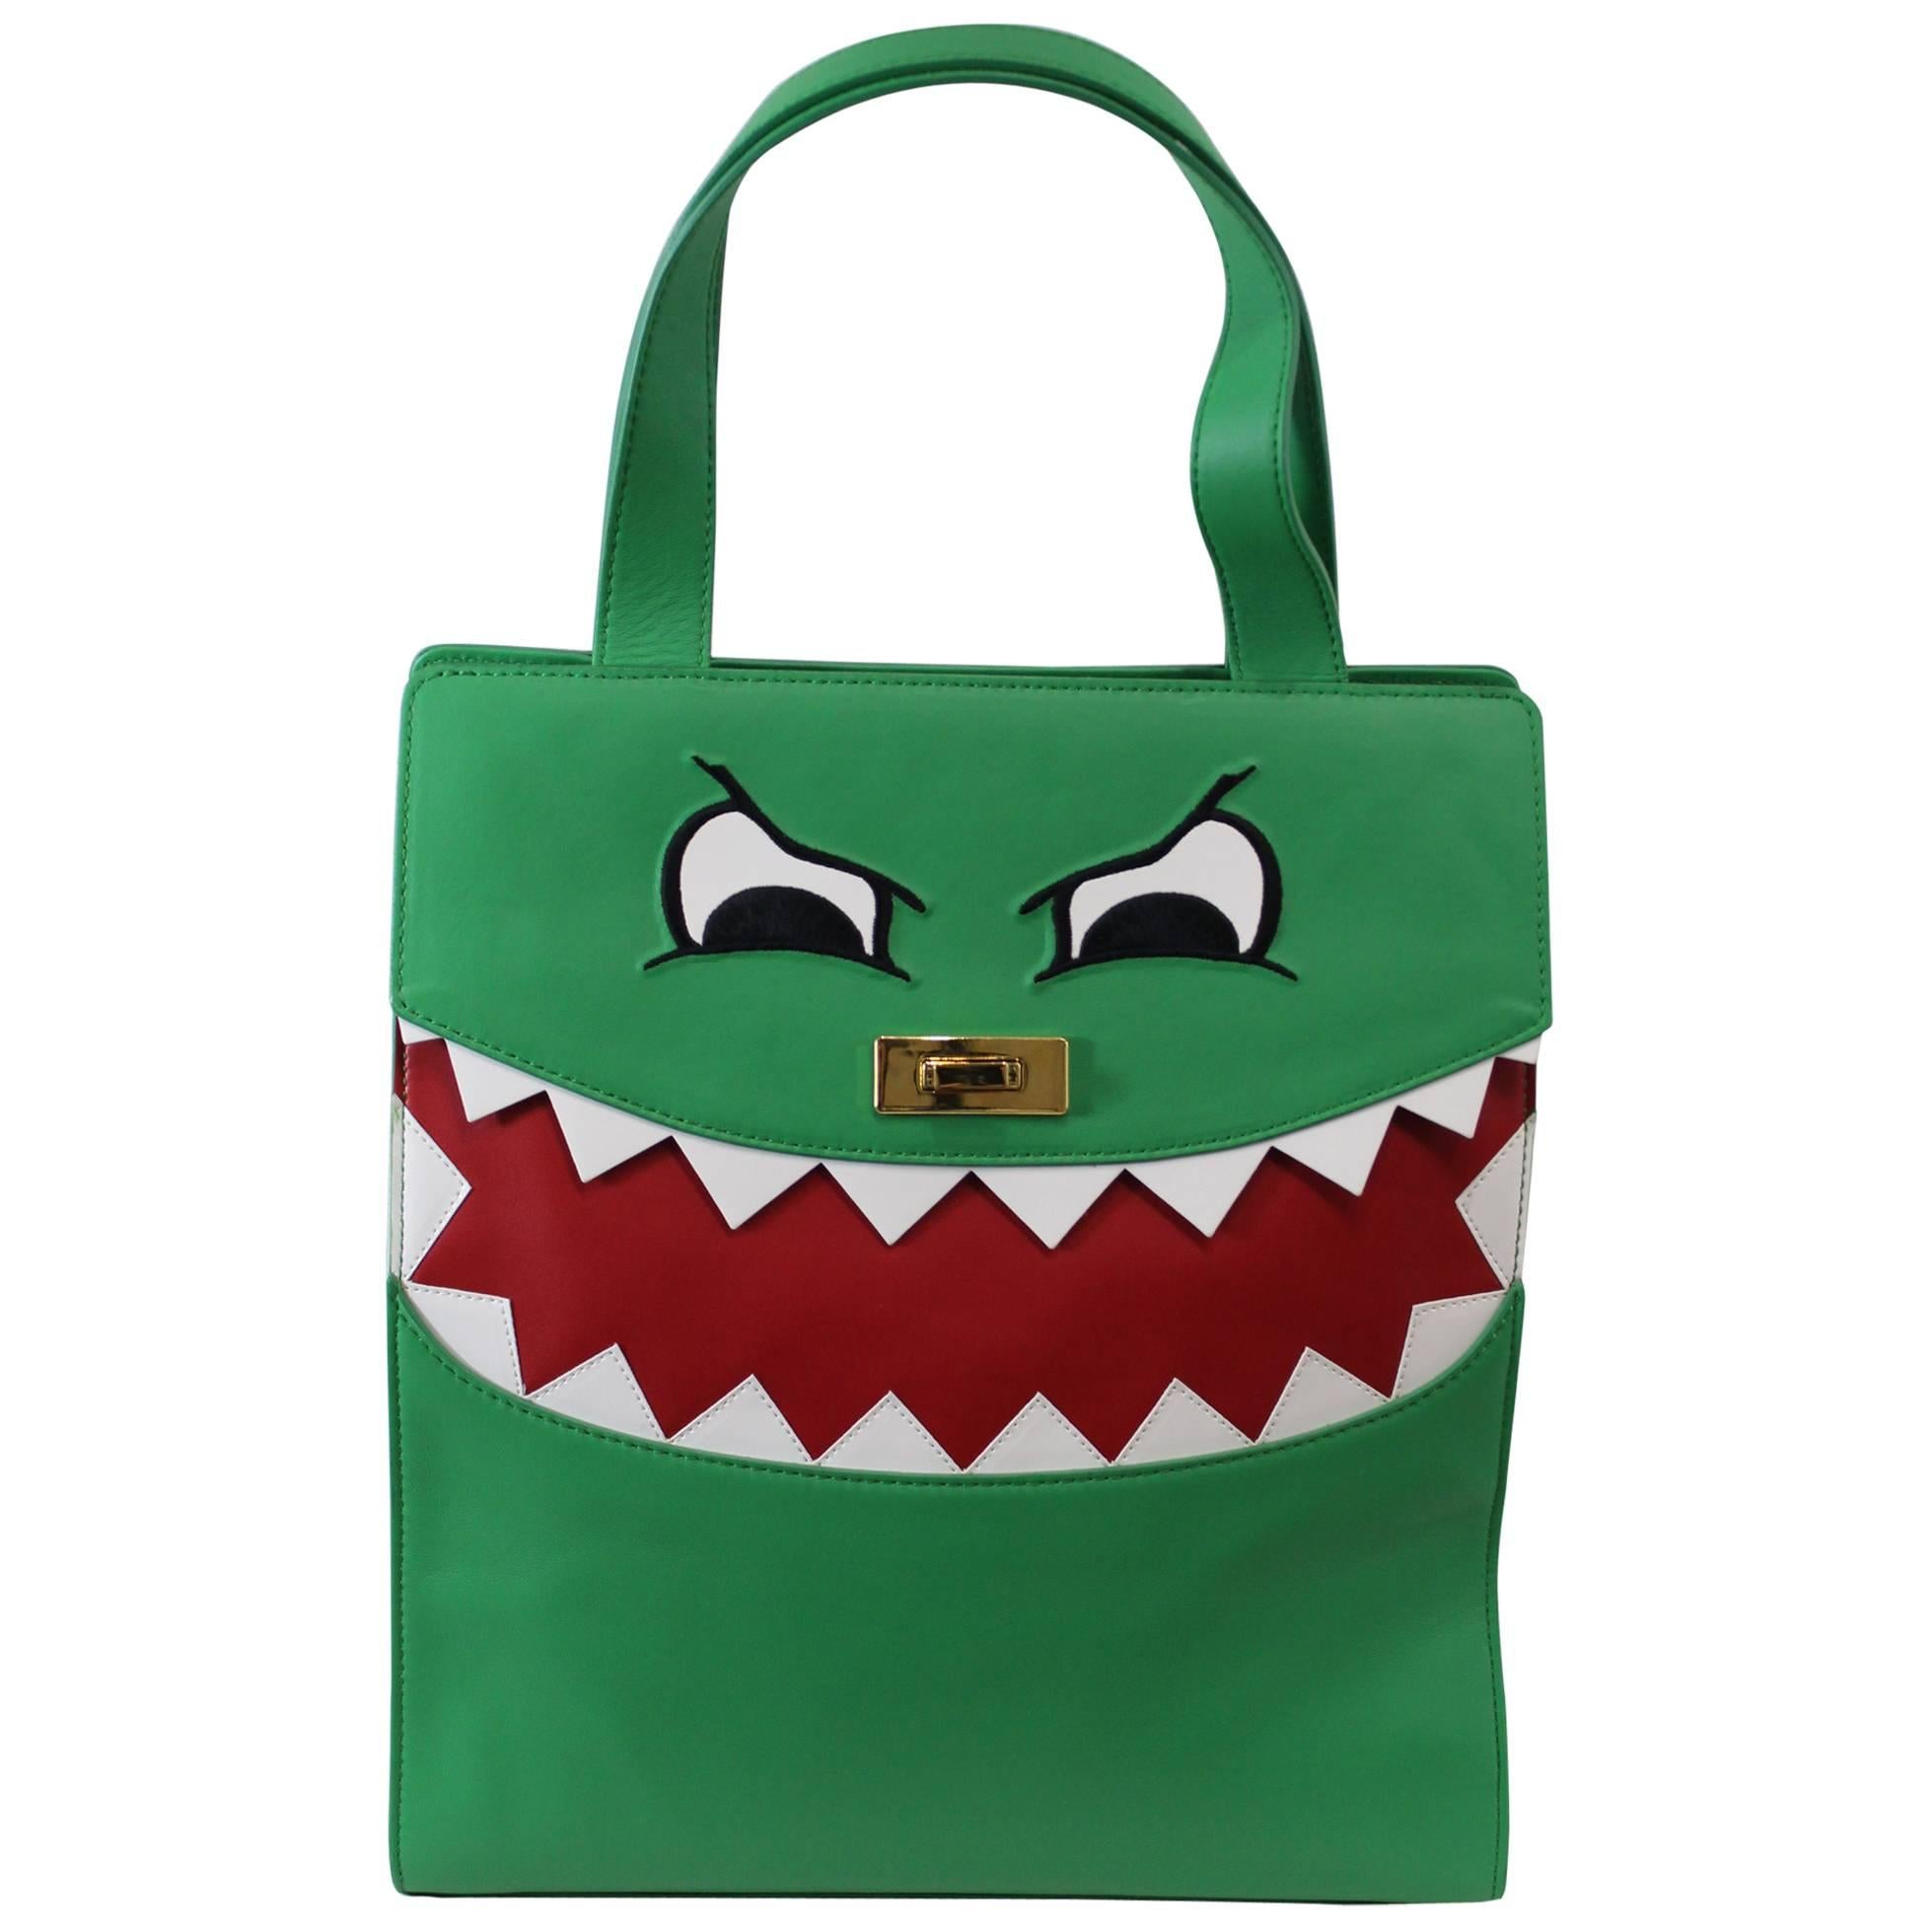 Lovely Moschino Cheap and Chic Dino Green Tote Bag